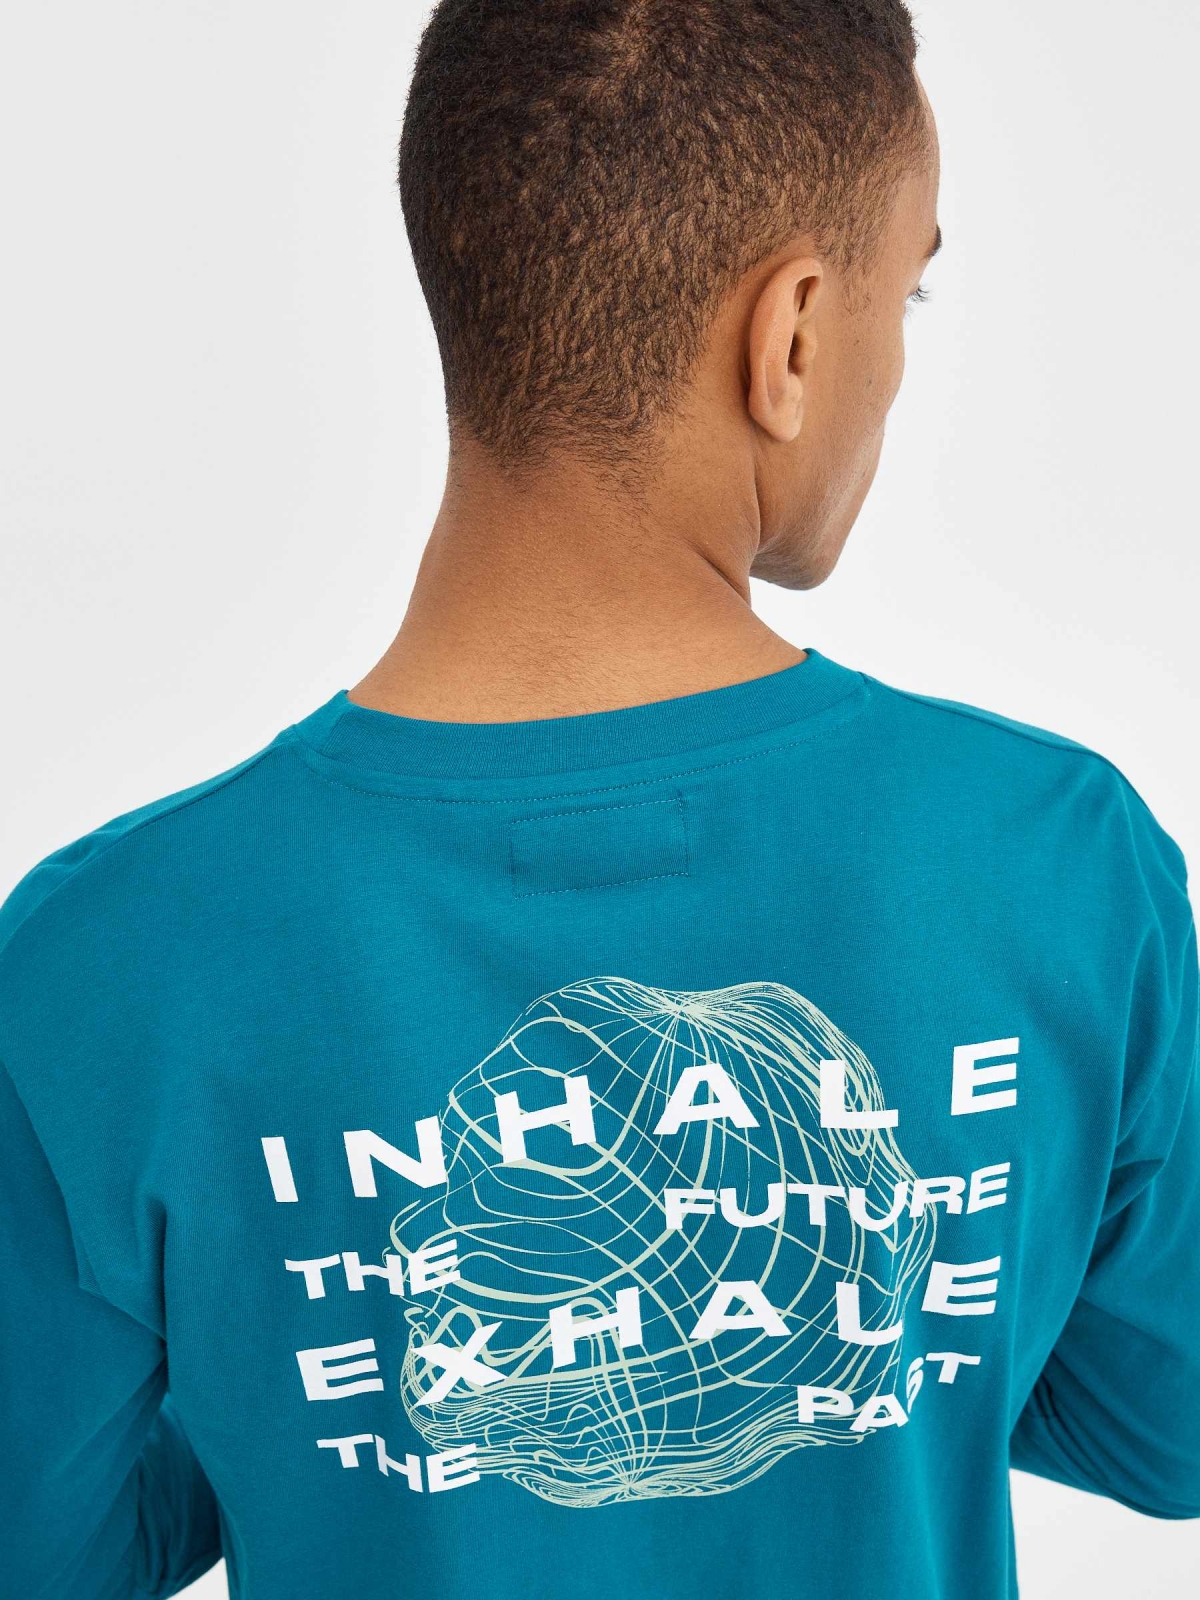 INHALE T-shirt turquoise detail view